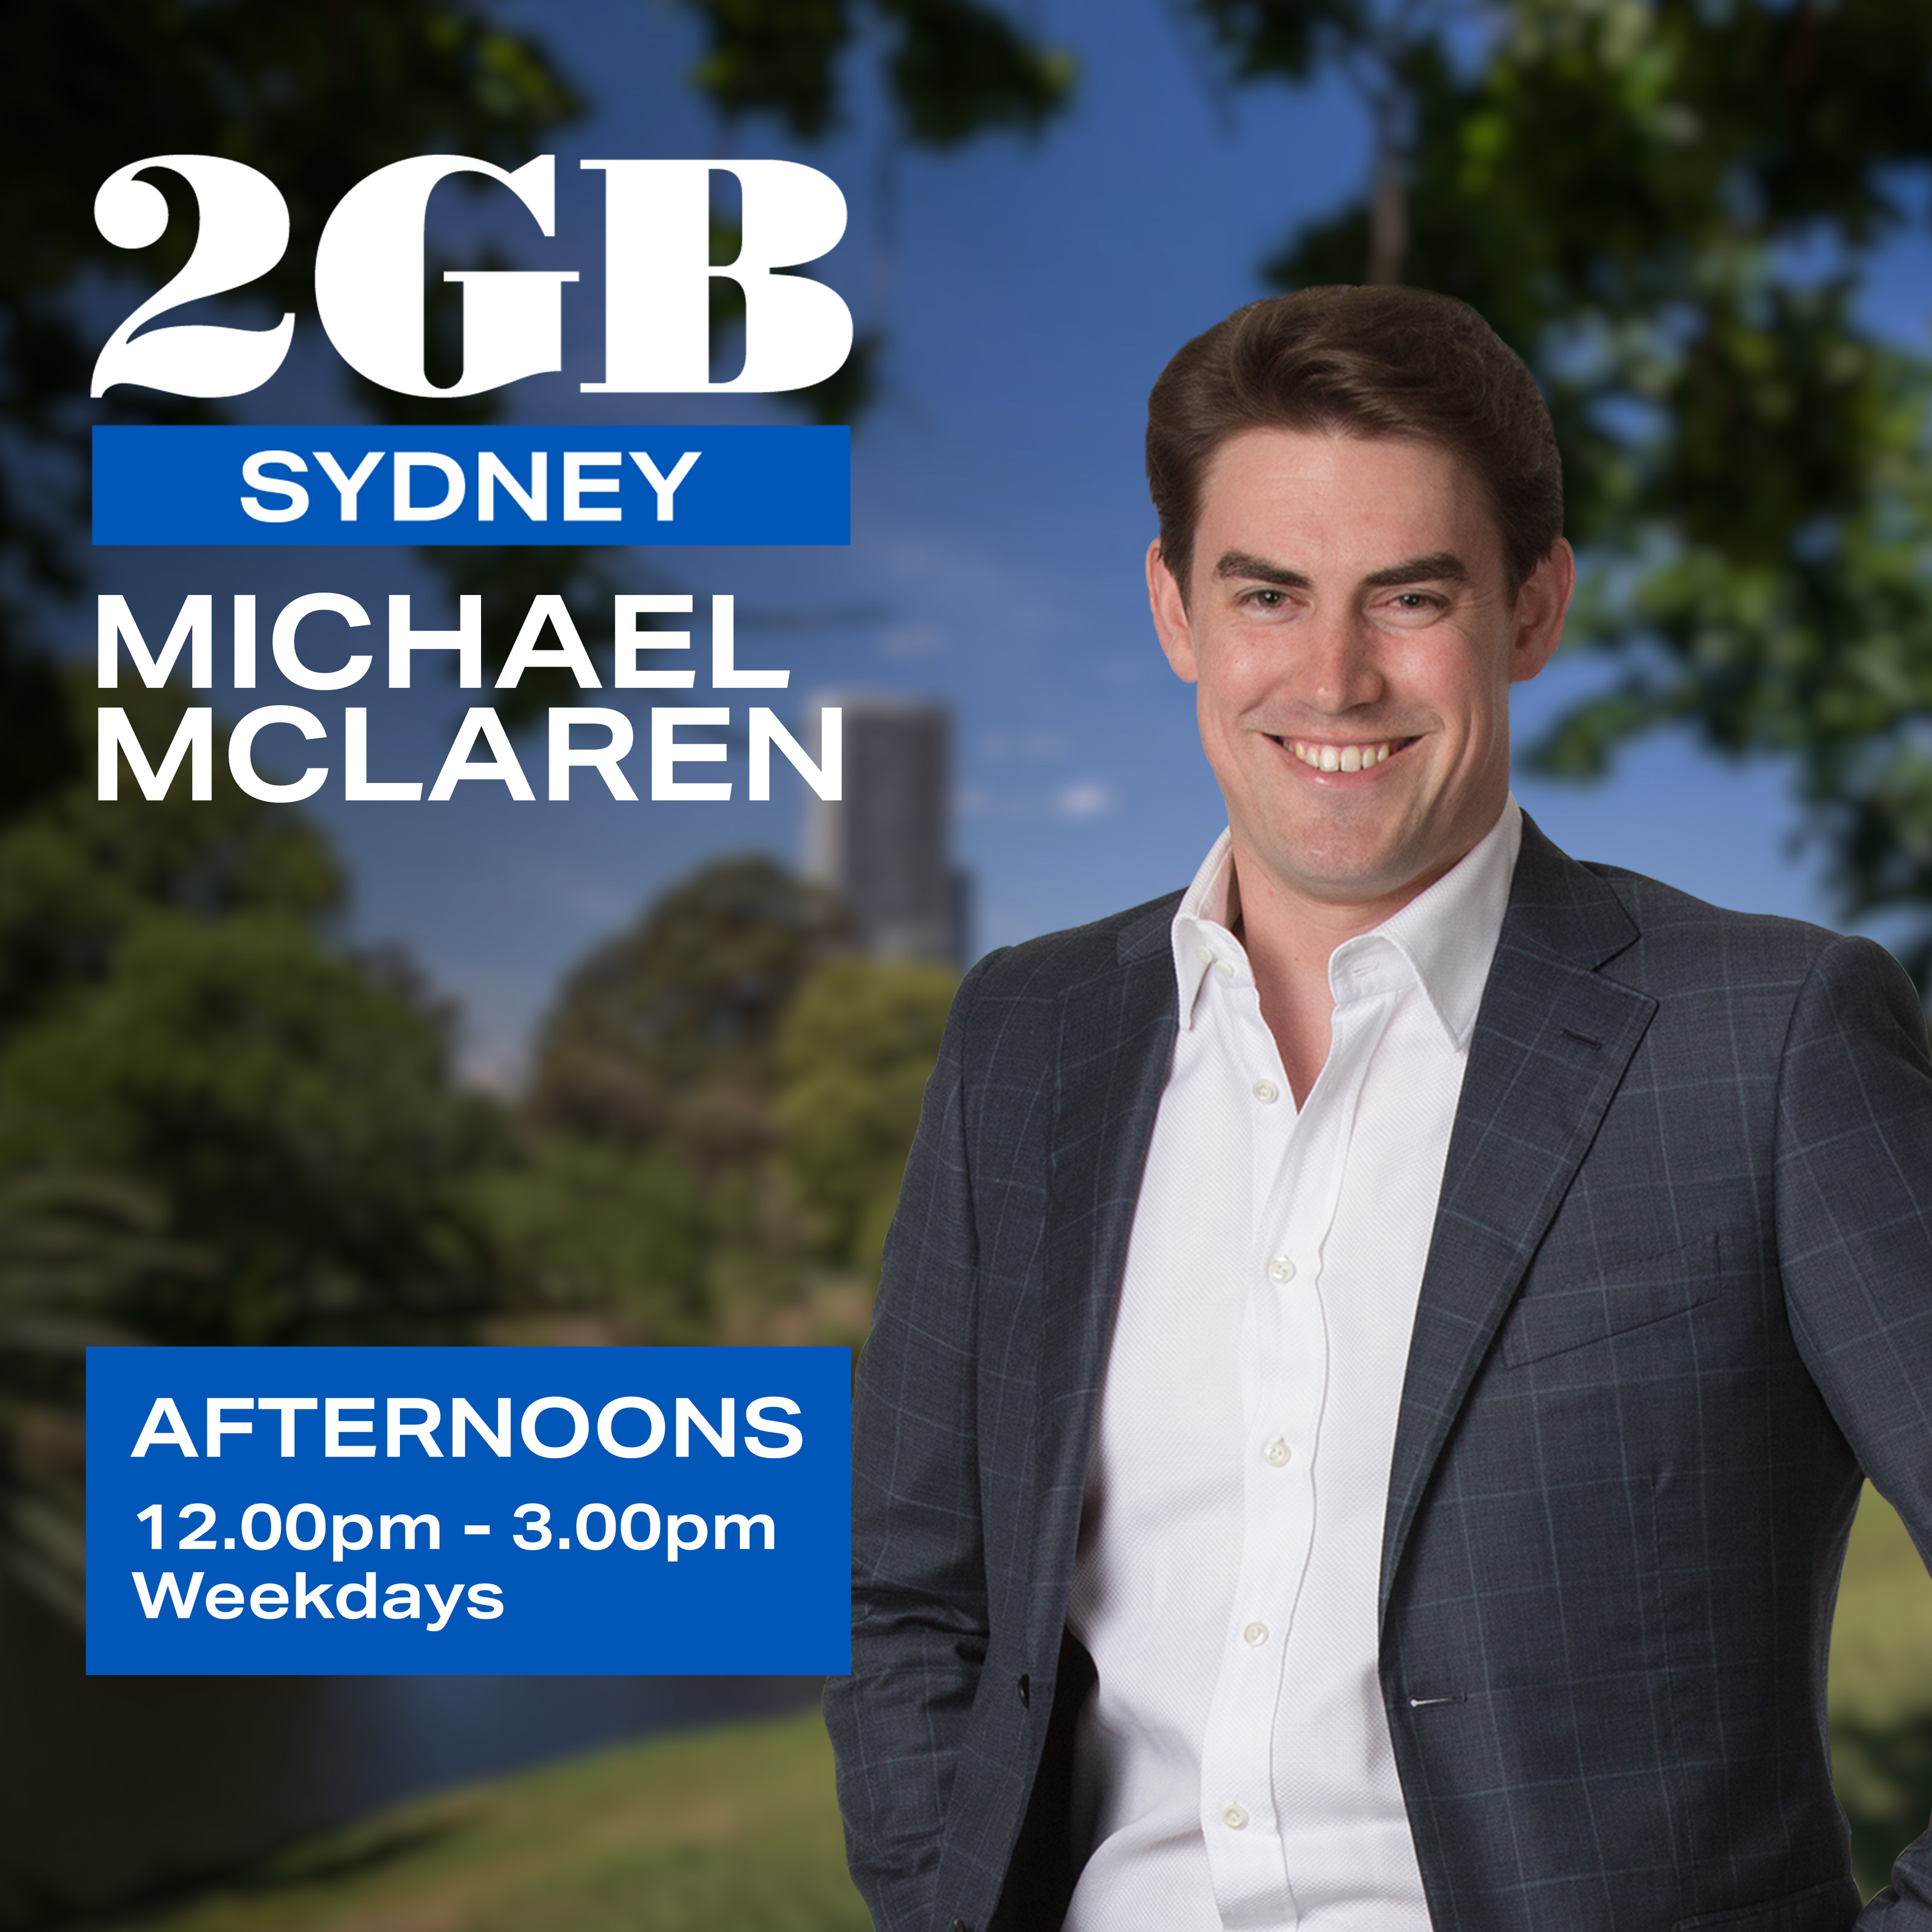 Afternoons with Michael McLaren - Friday, 26th April